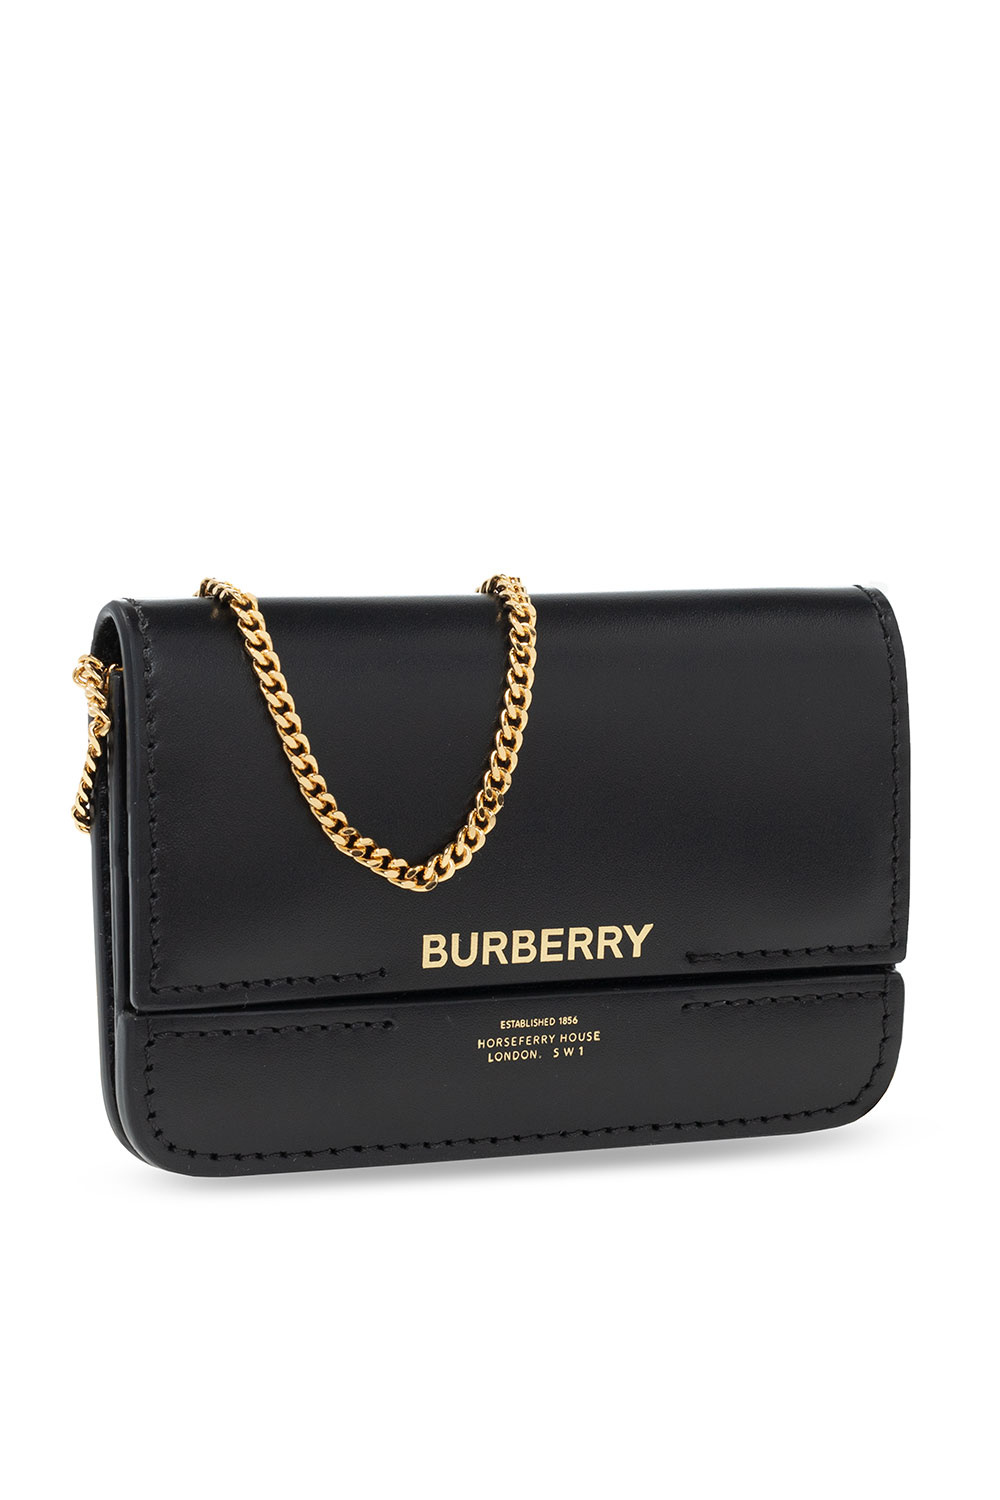 Burberry Purse With Black American Express Credit Card - Limoges Box